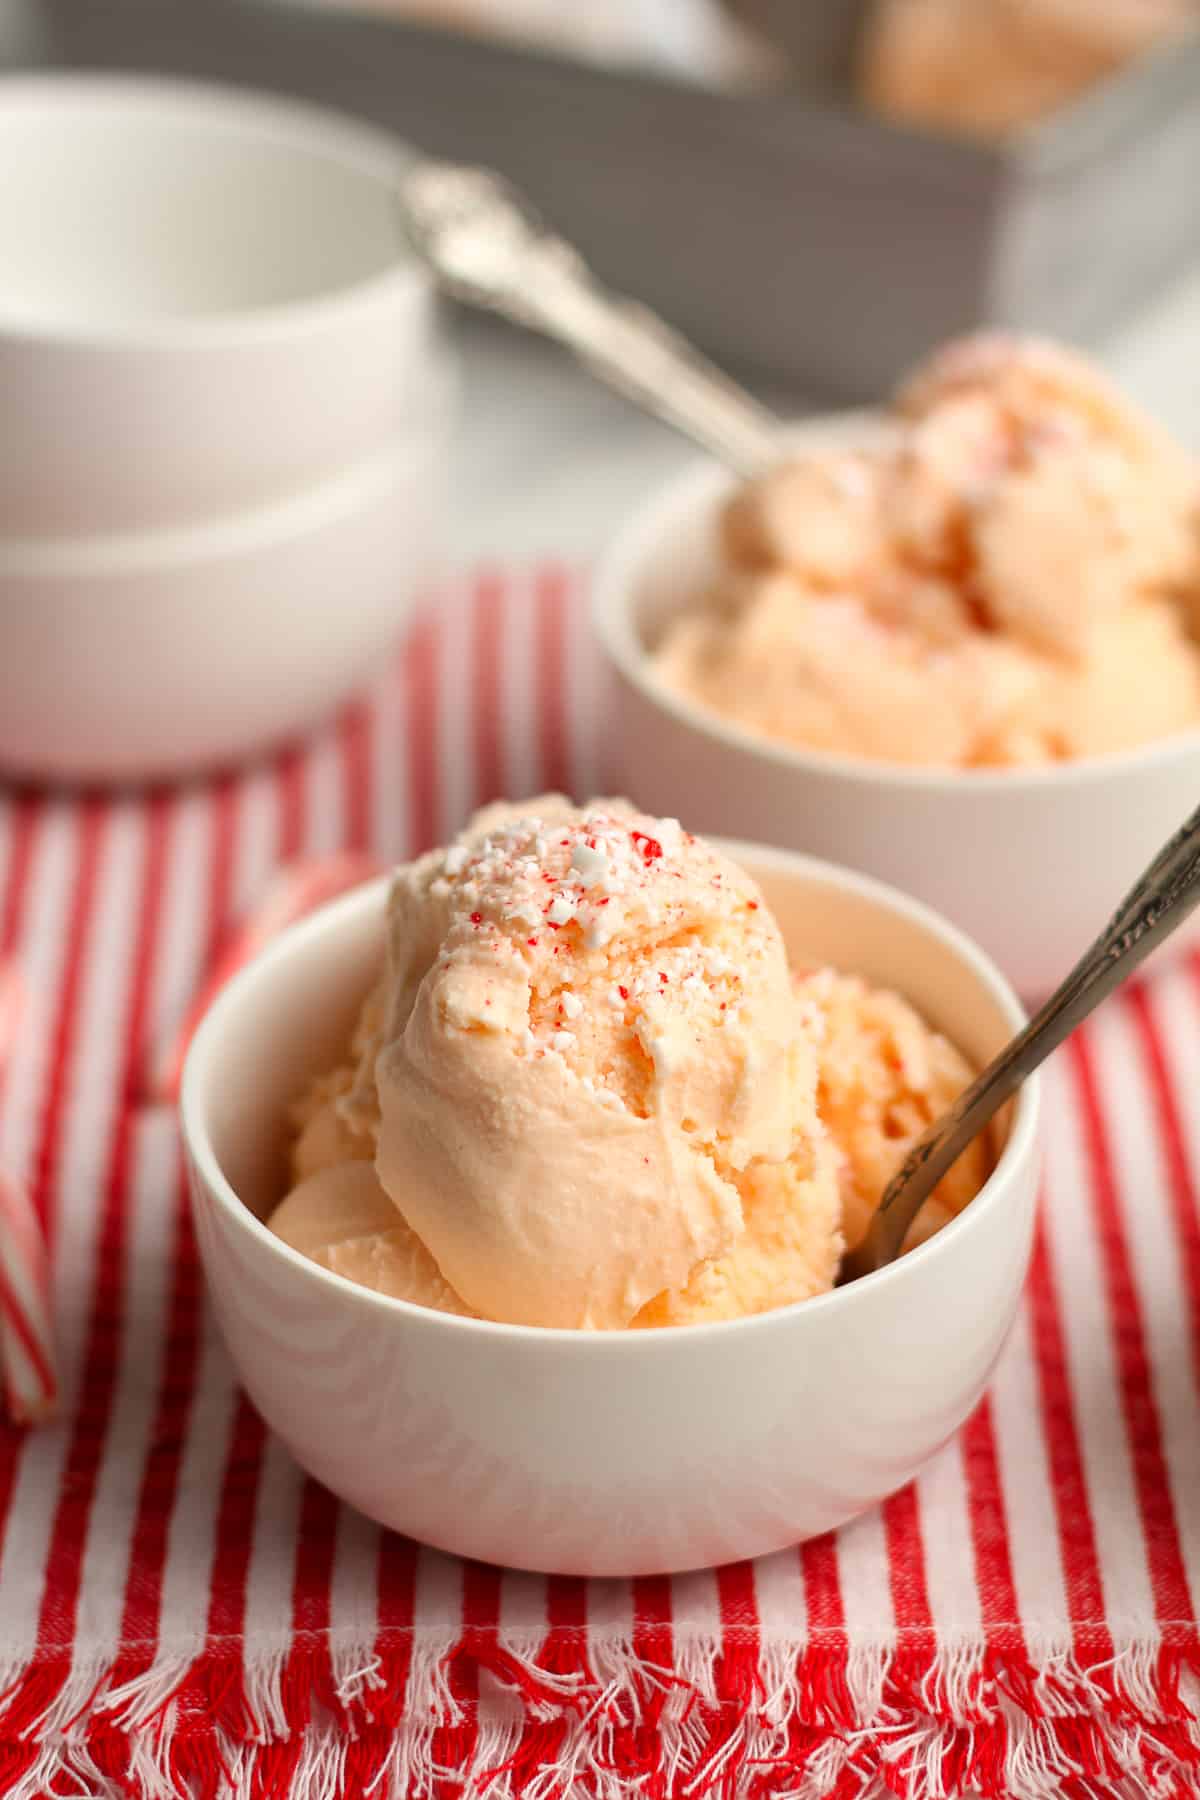 Side view of two bowls of peppermint stick ice cream.